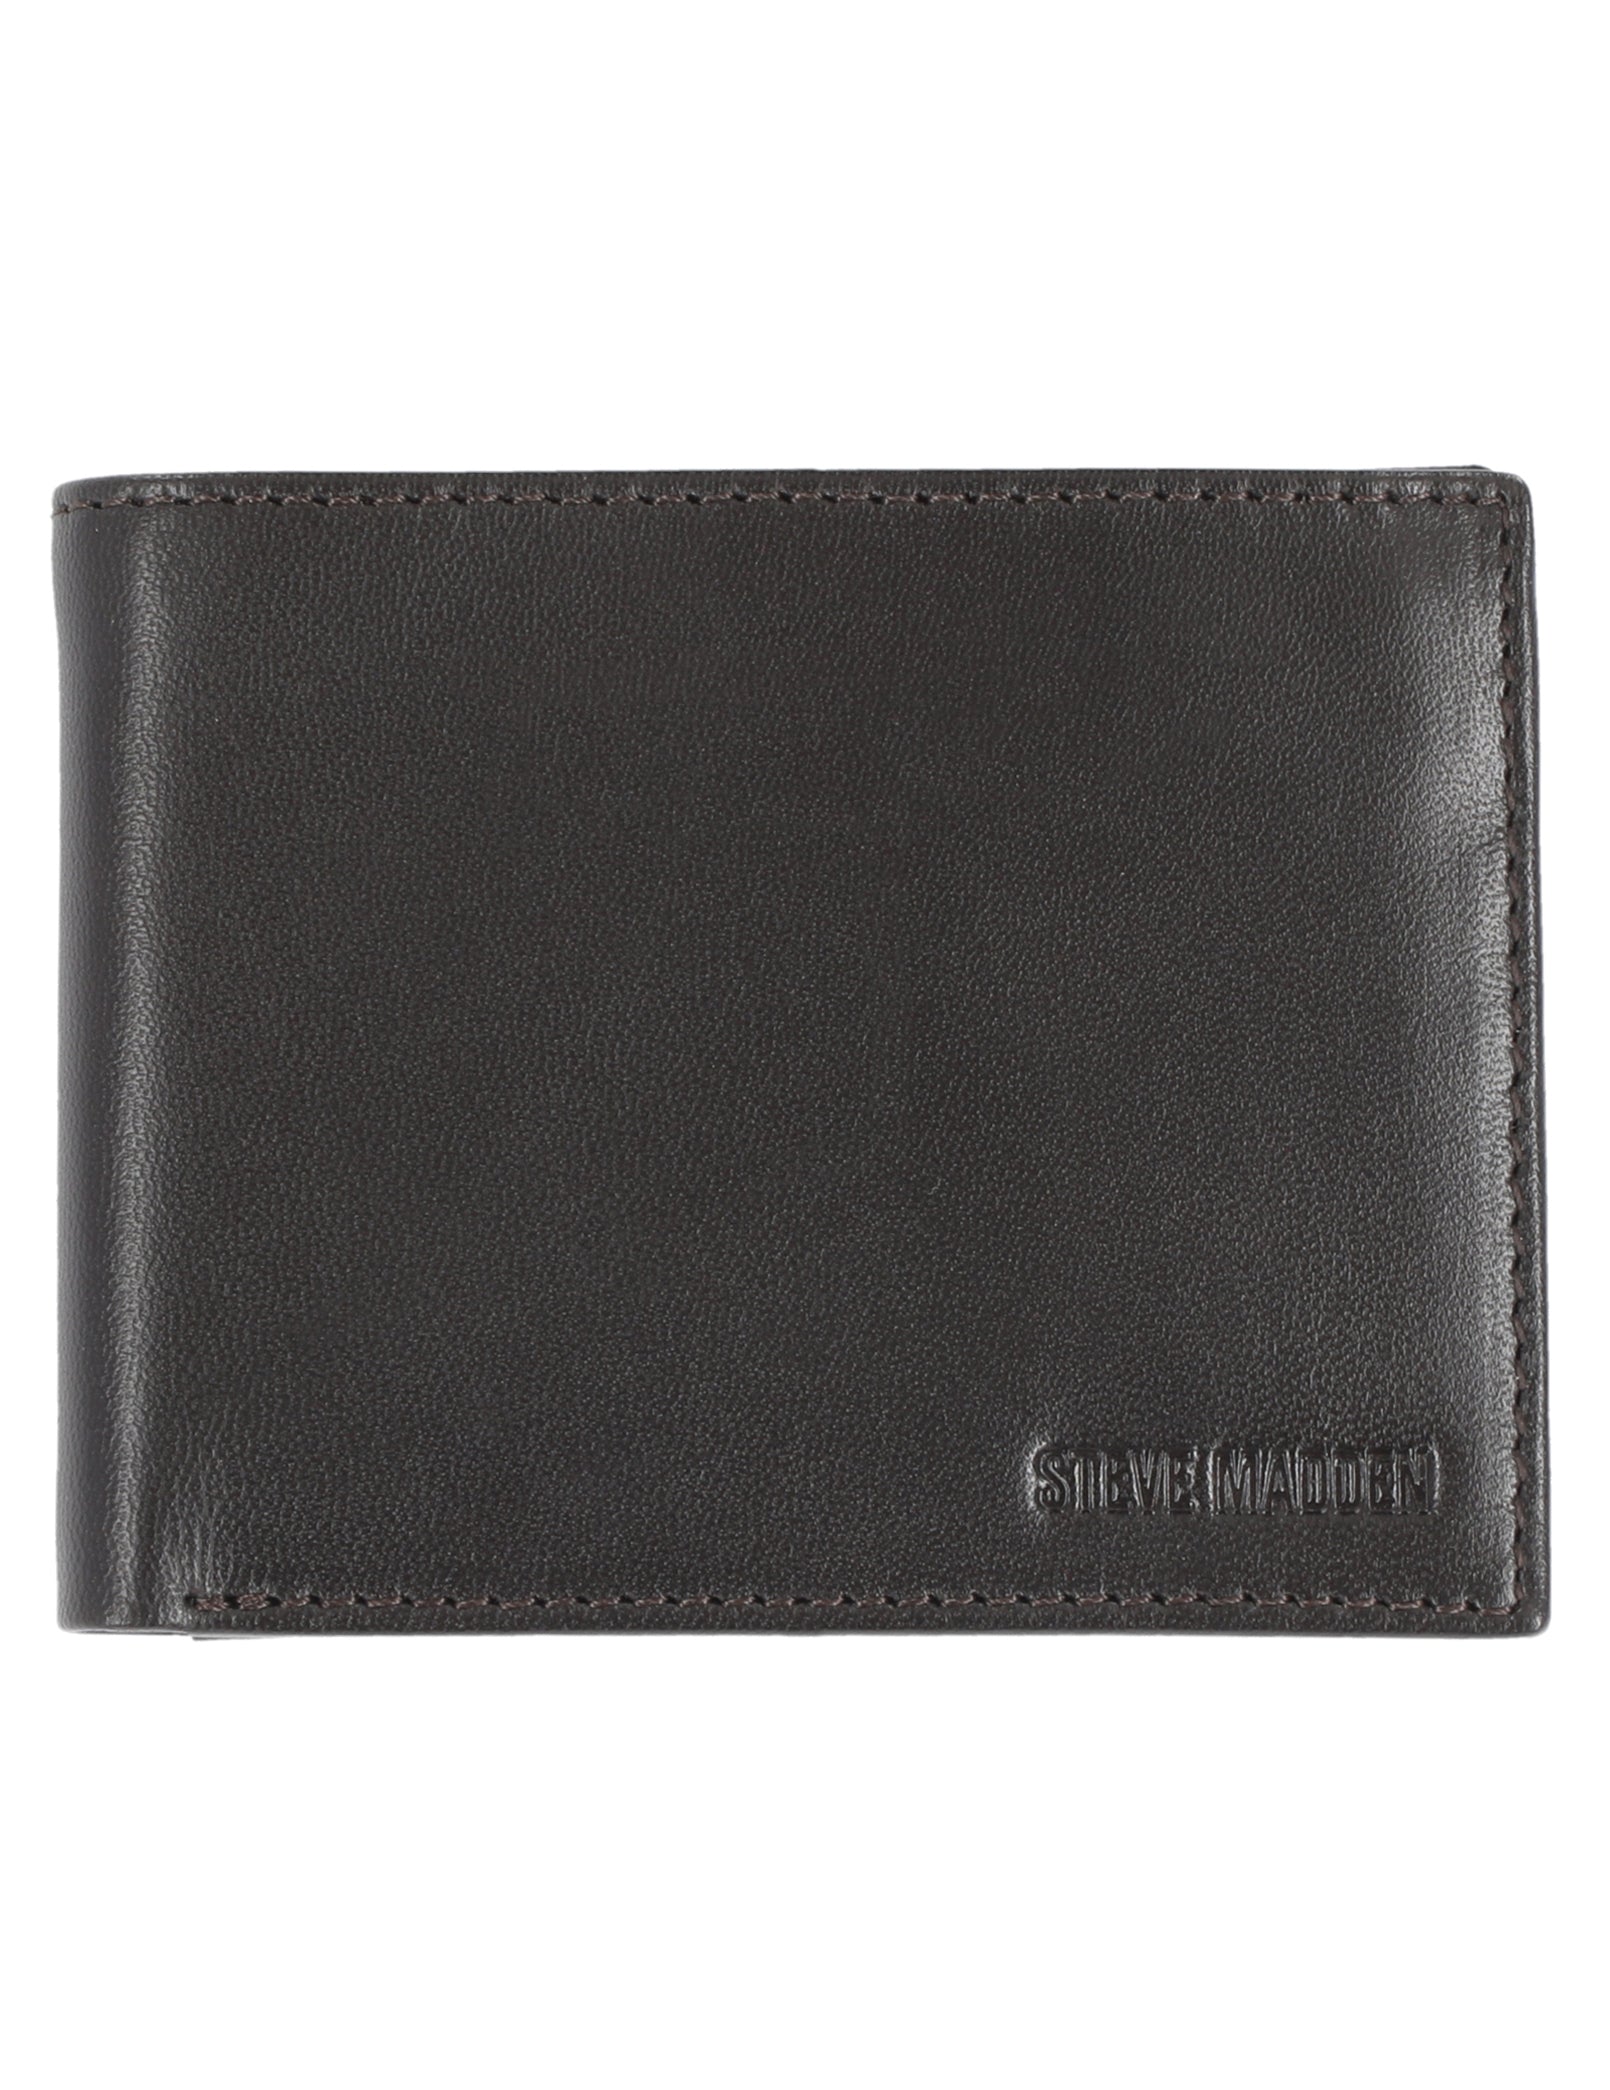 Black leather wallet with 8 card slots, 1 clear slot for your ID, and 1 large bill compartment with RFID blocking technology